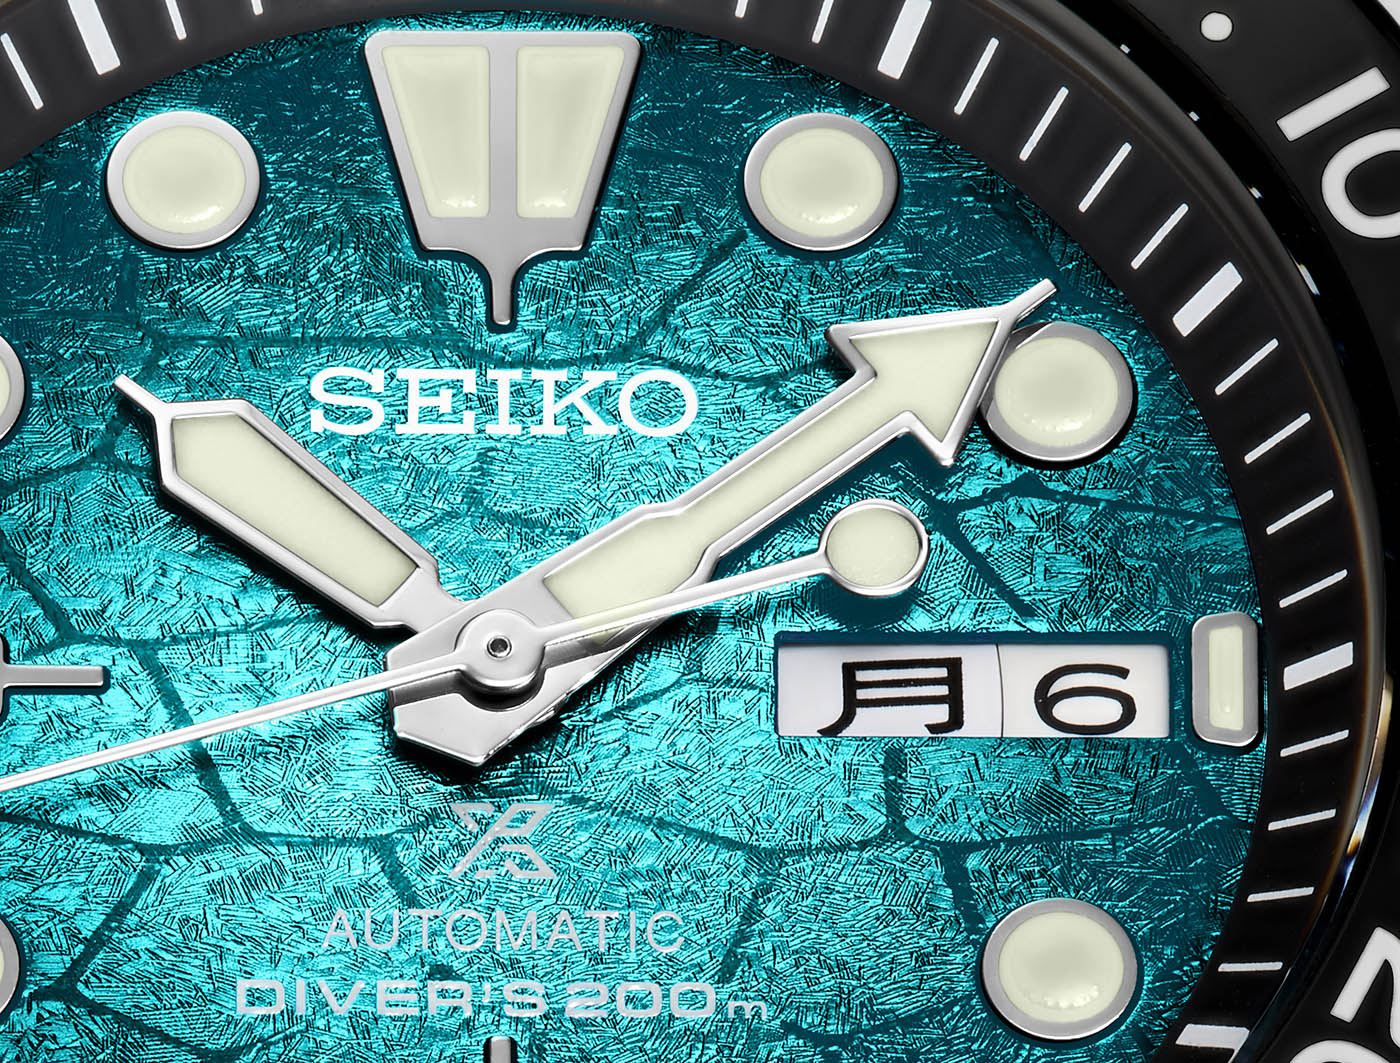 Seiko Unveils Trio Of Prospex . Special Edition Dive Watches Inspired By  Sea Turtles | aBlogtoWatch